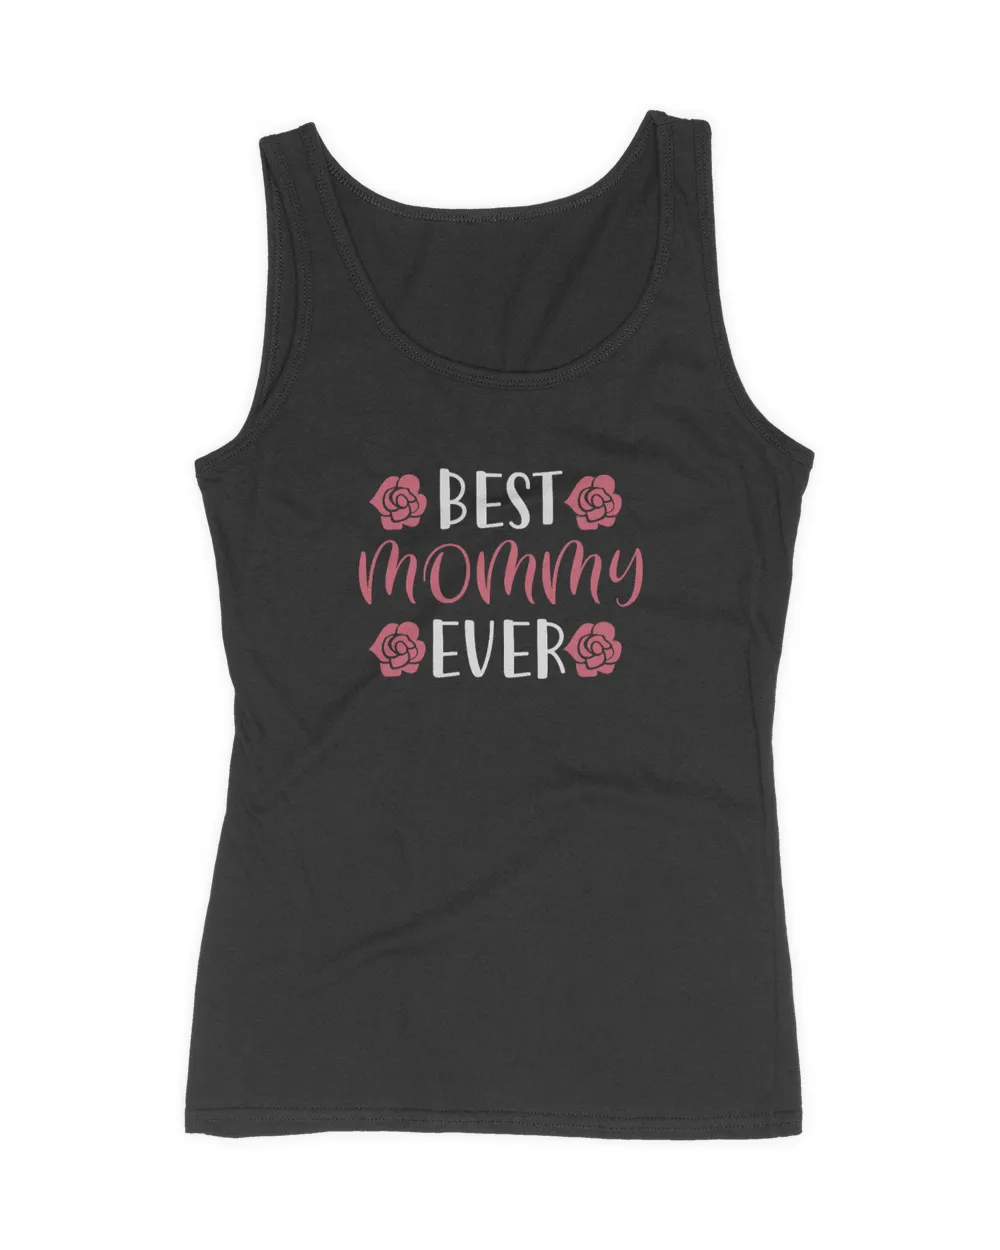 Best mommy ever tee t shirt